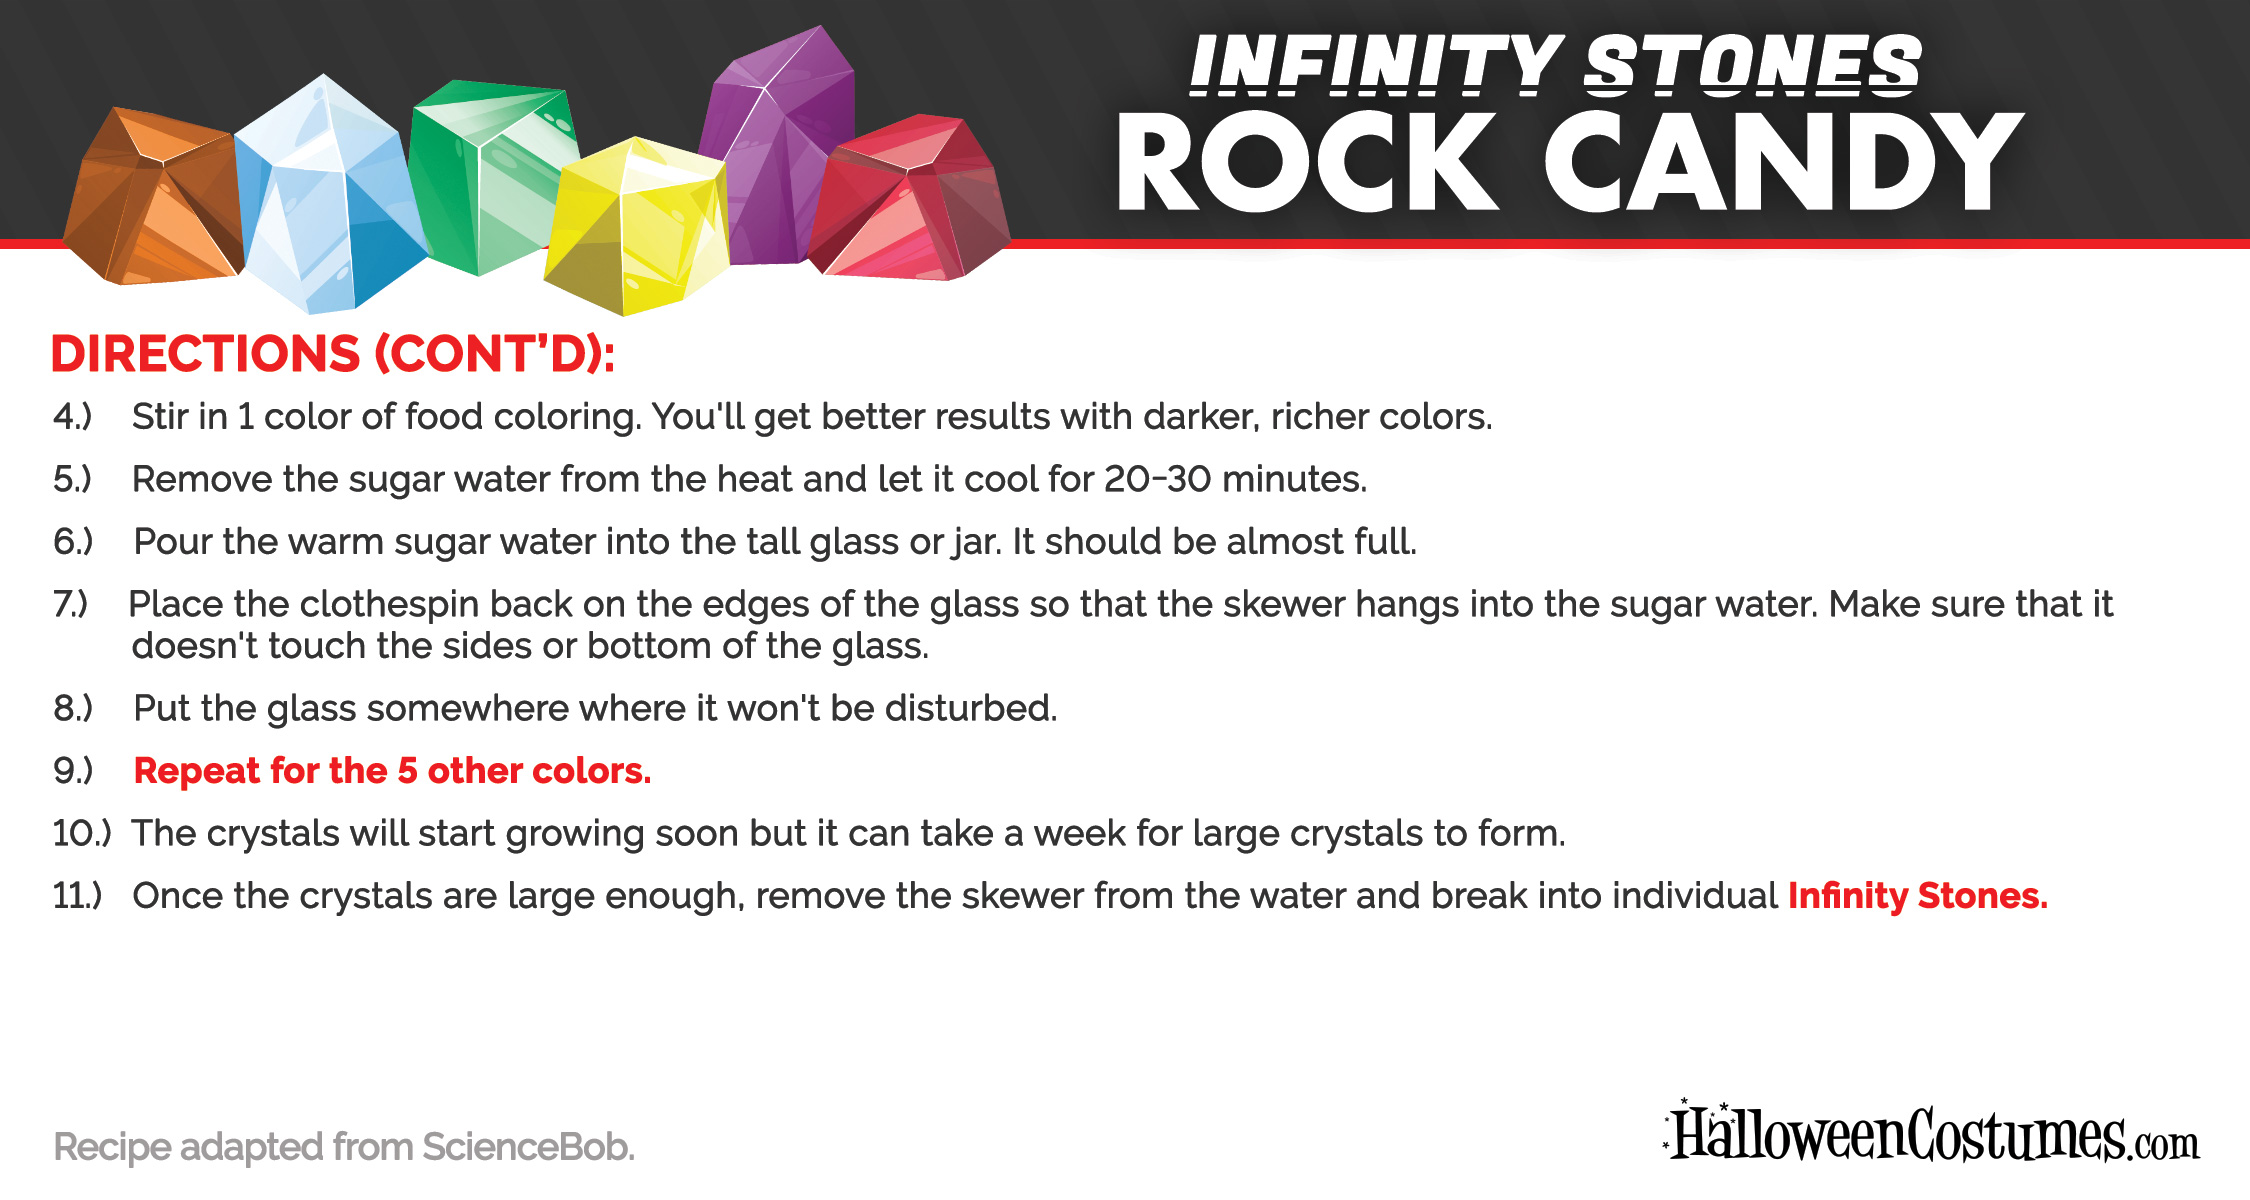 The Avengers Rock Candy Infinity Stones Recipe, Page 2